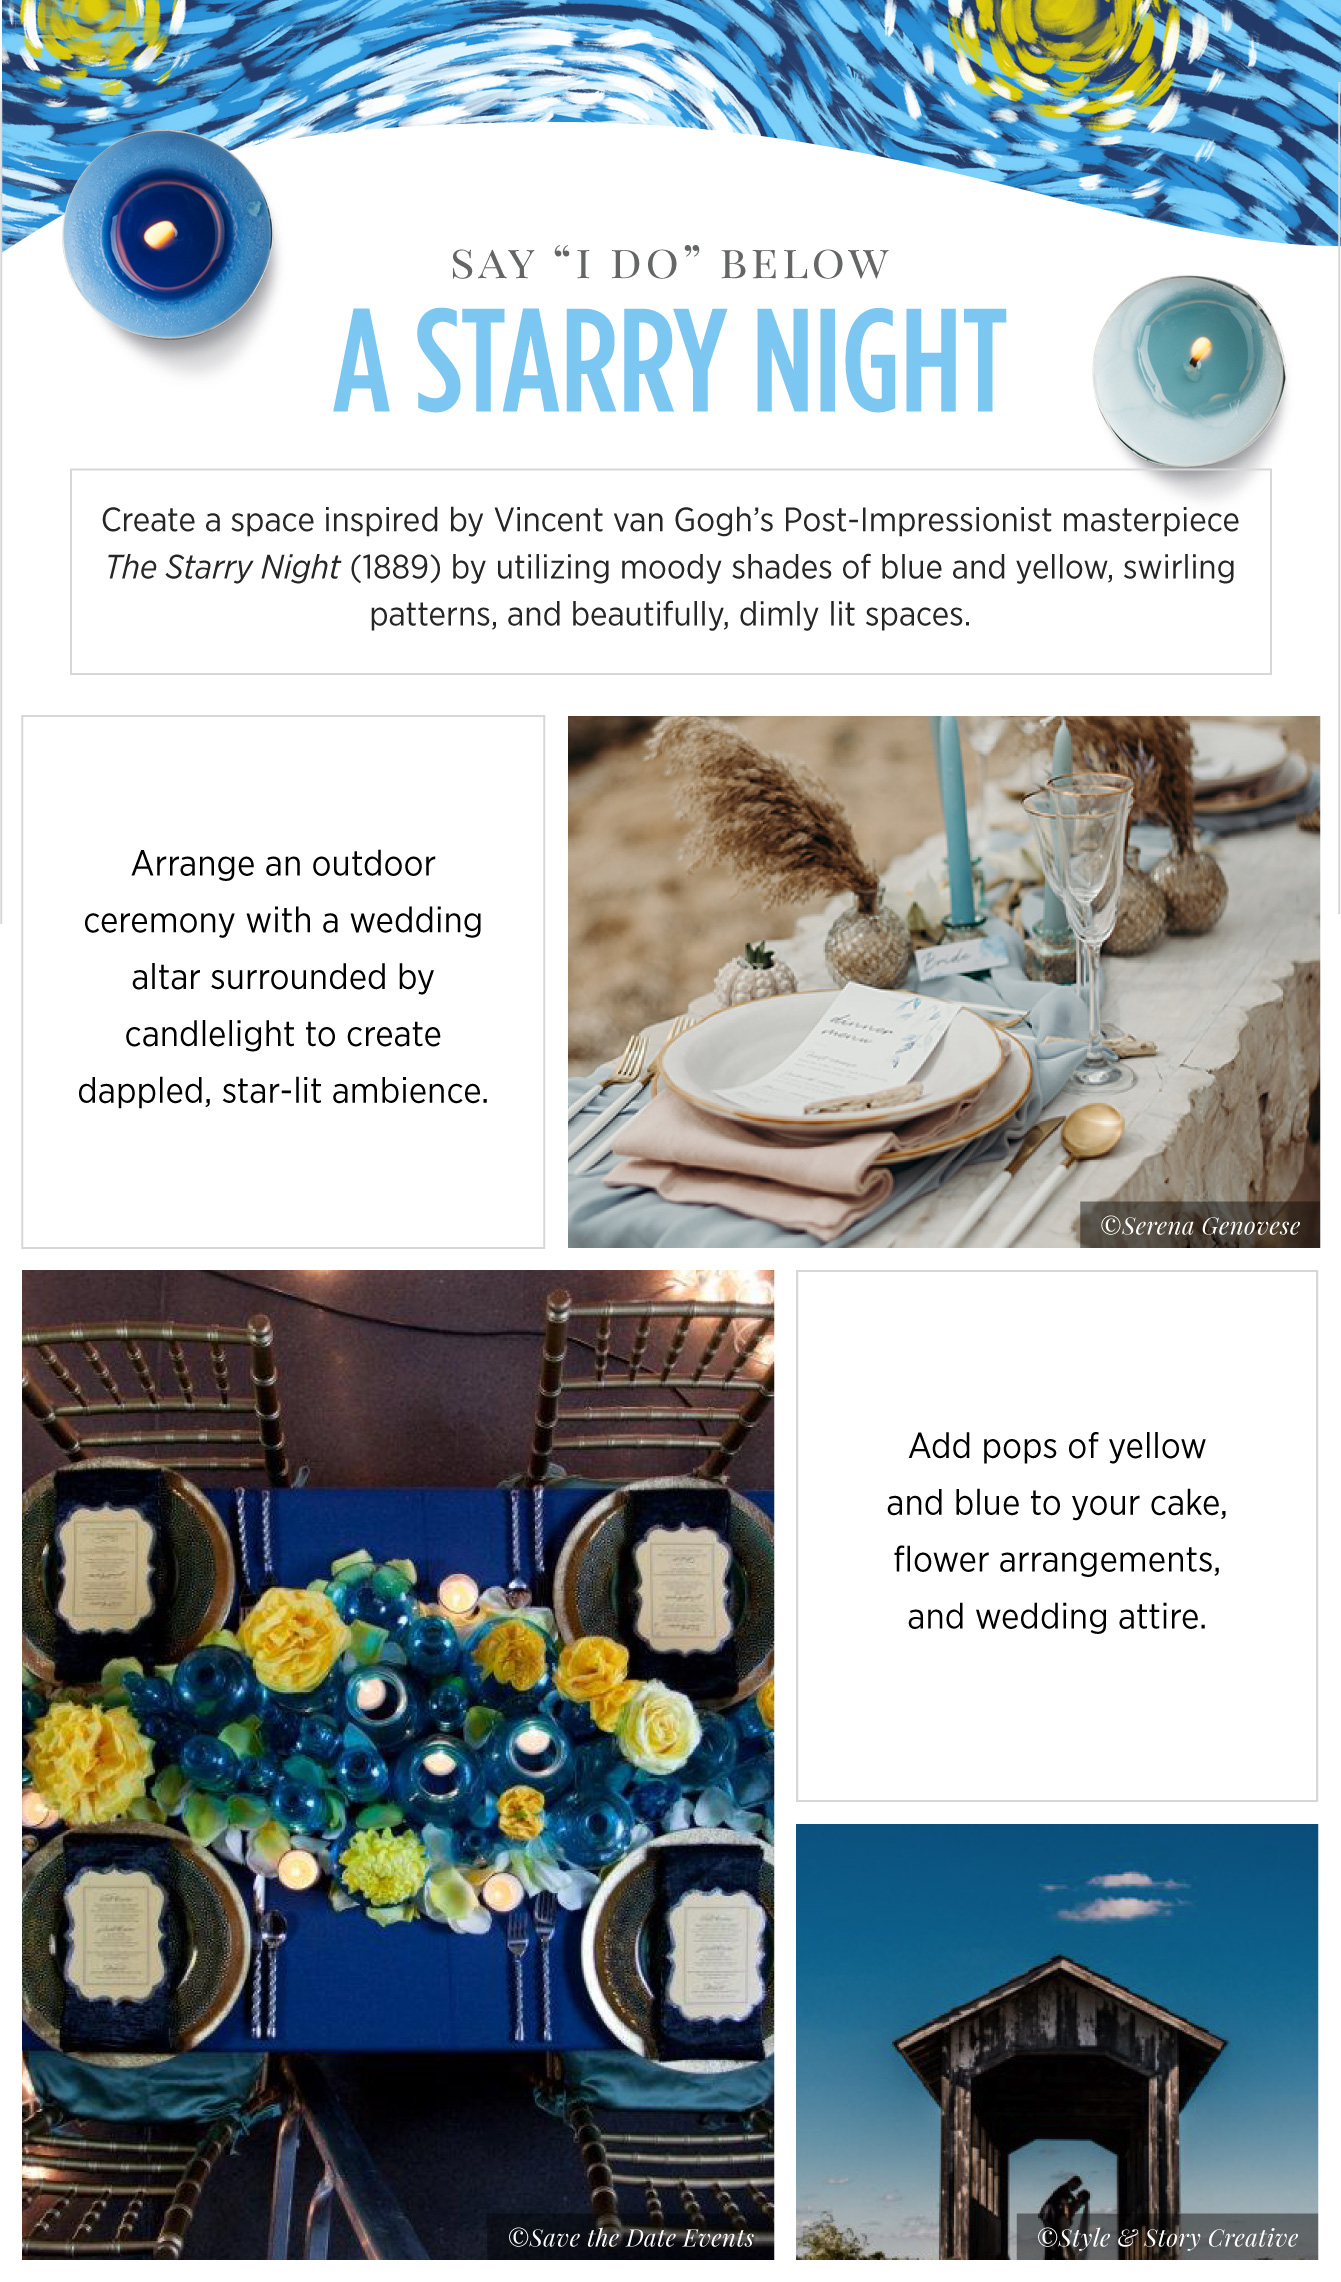 Wedding inspiration Van Gogh - See more inspirating wedding themes on B. Lovely Events